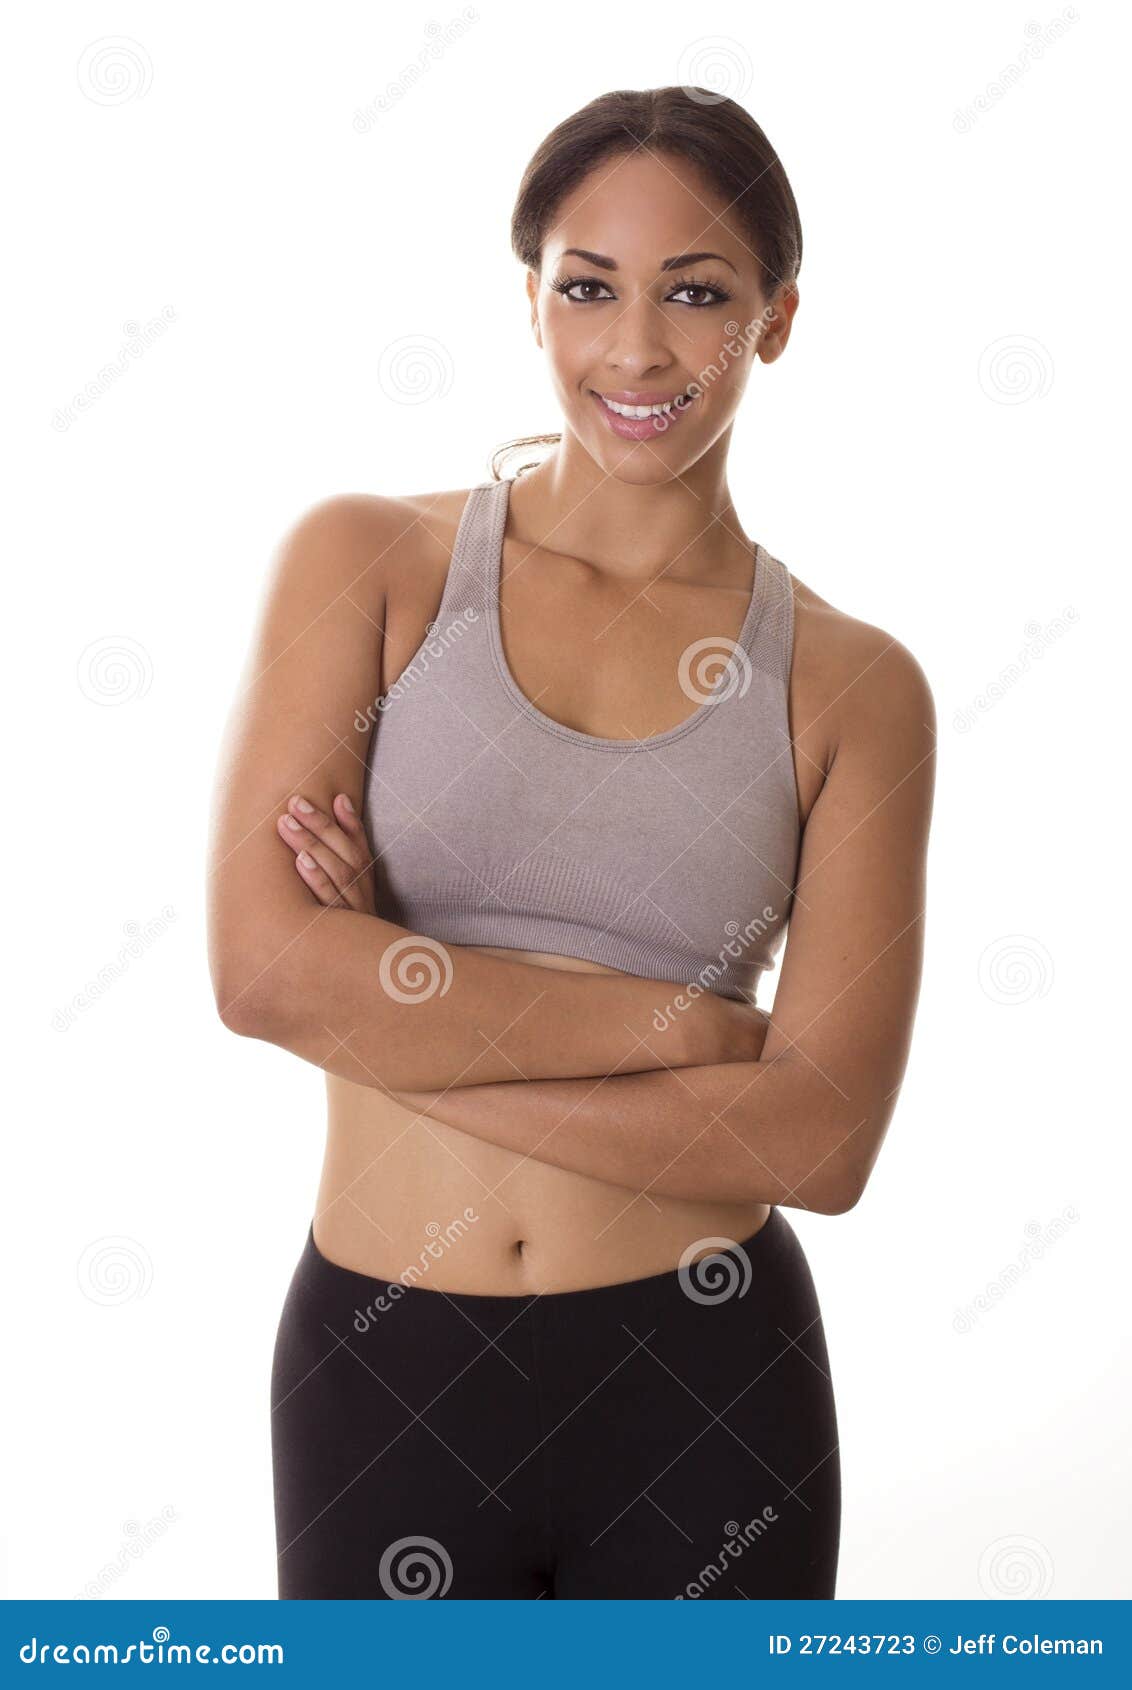 A Beautiful Fit Woman Smiles in Workout Clothes. Stock Image